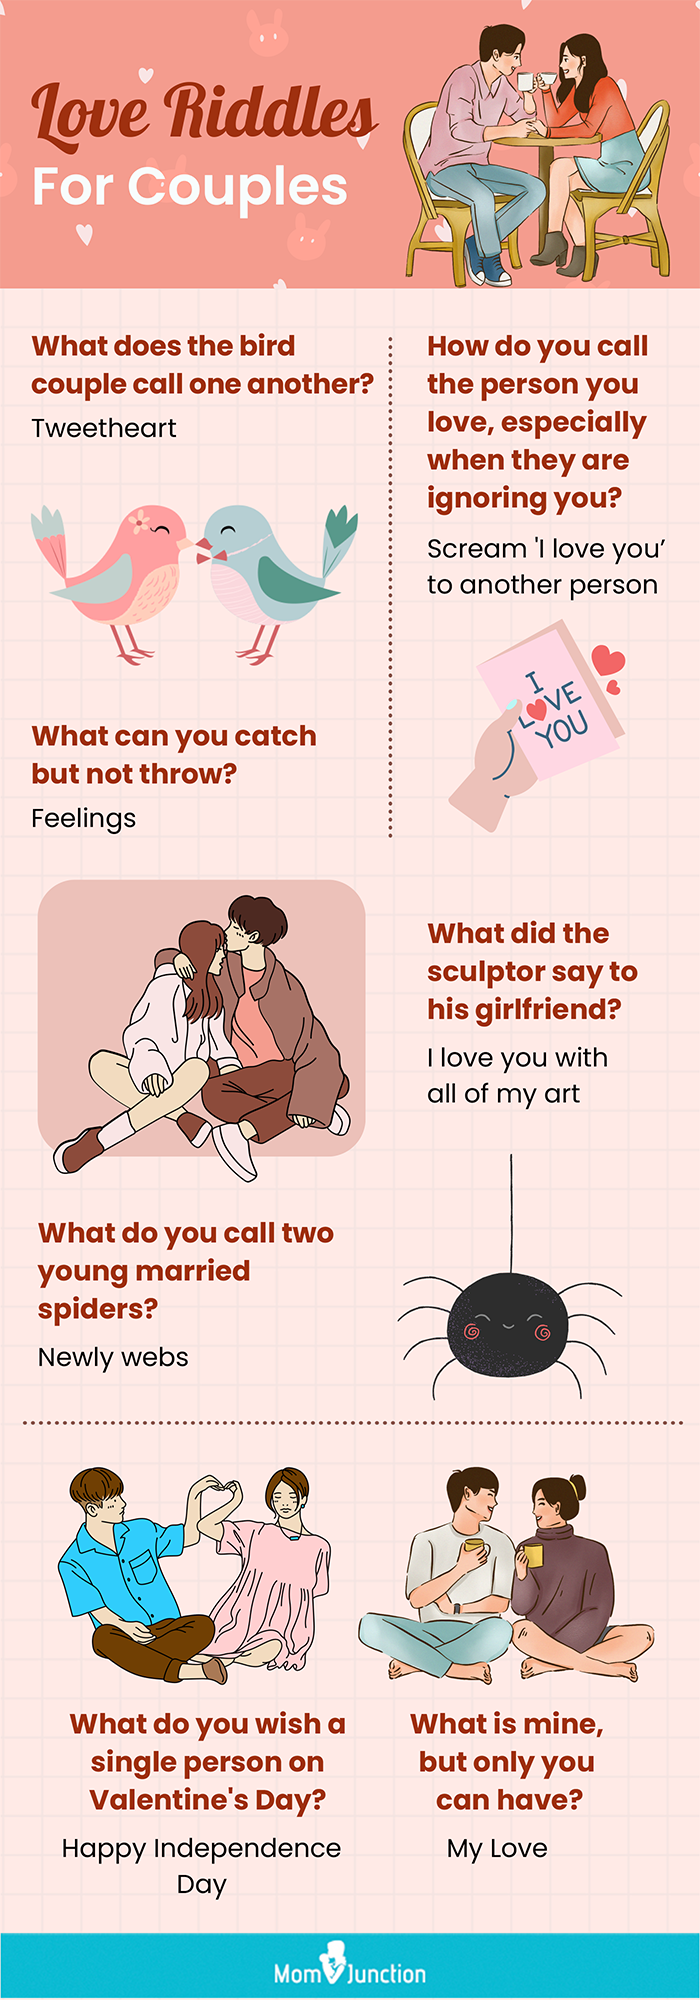 love riddles for couples (infographic)